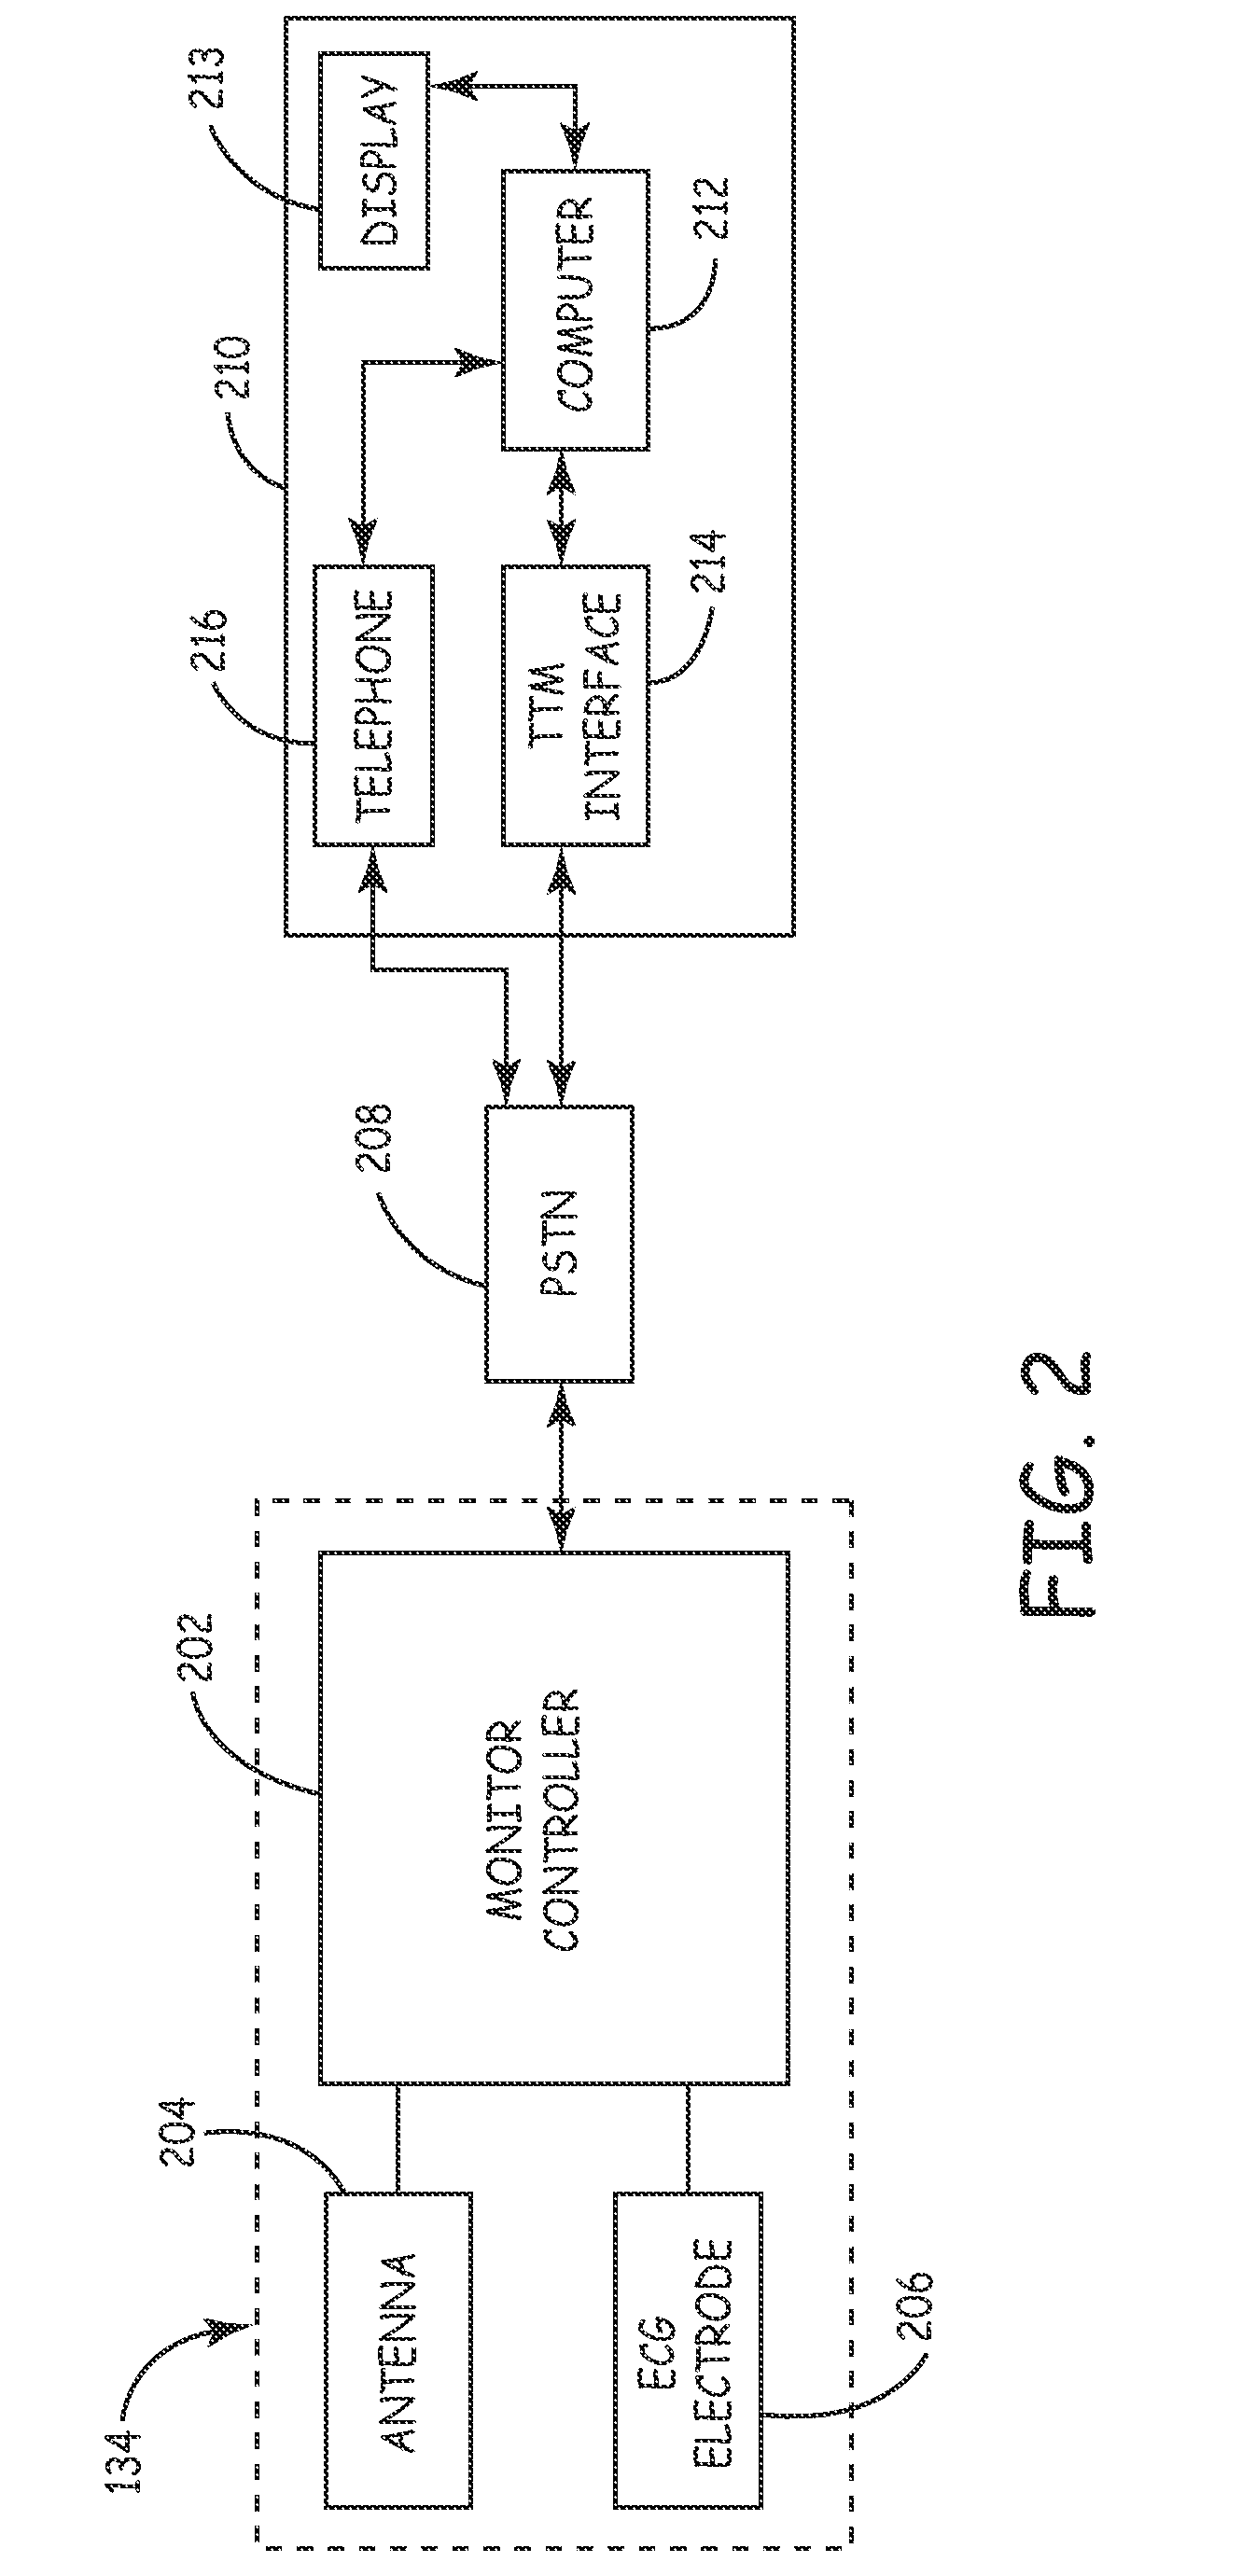 System and Method for Real-Time Remote Monitoring of Implantable Medical Devices